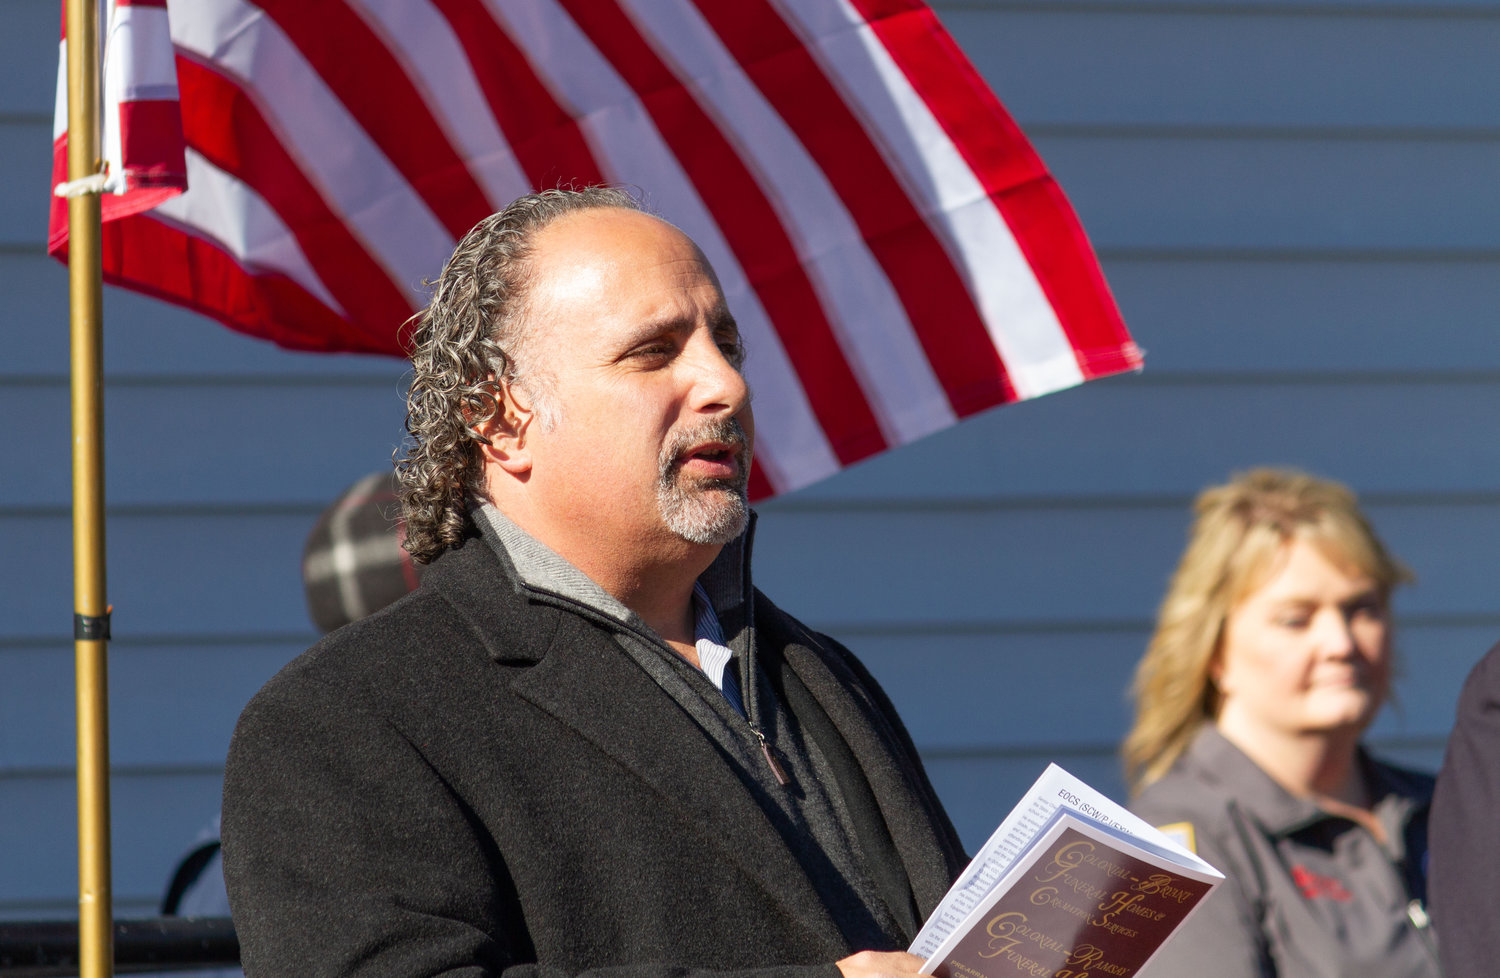 Steven Vegliante, the Democrat incumbent and current Fallsburg’s Supervisor has filed a lawsuit against his challenger over election ballots.